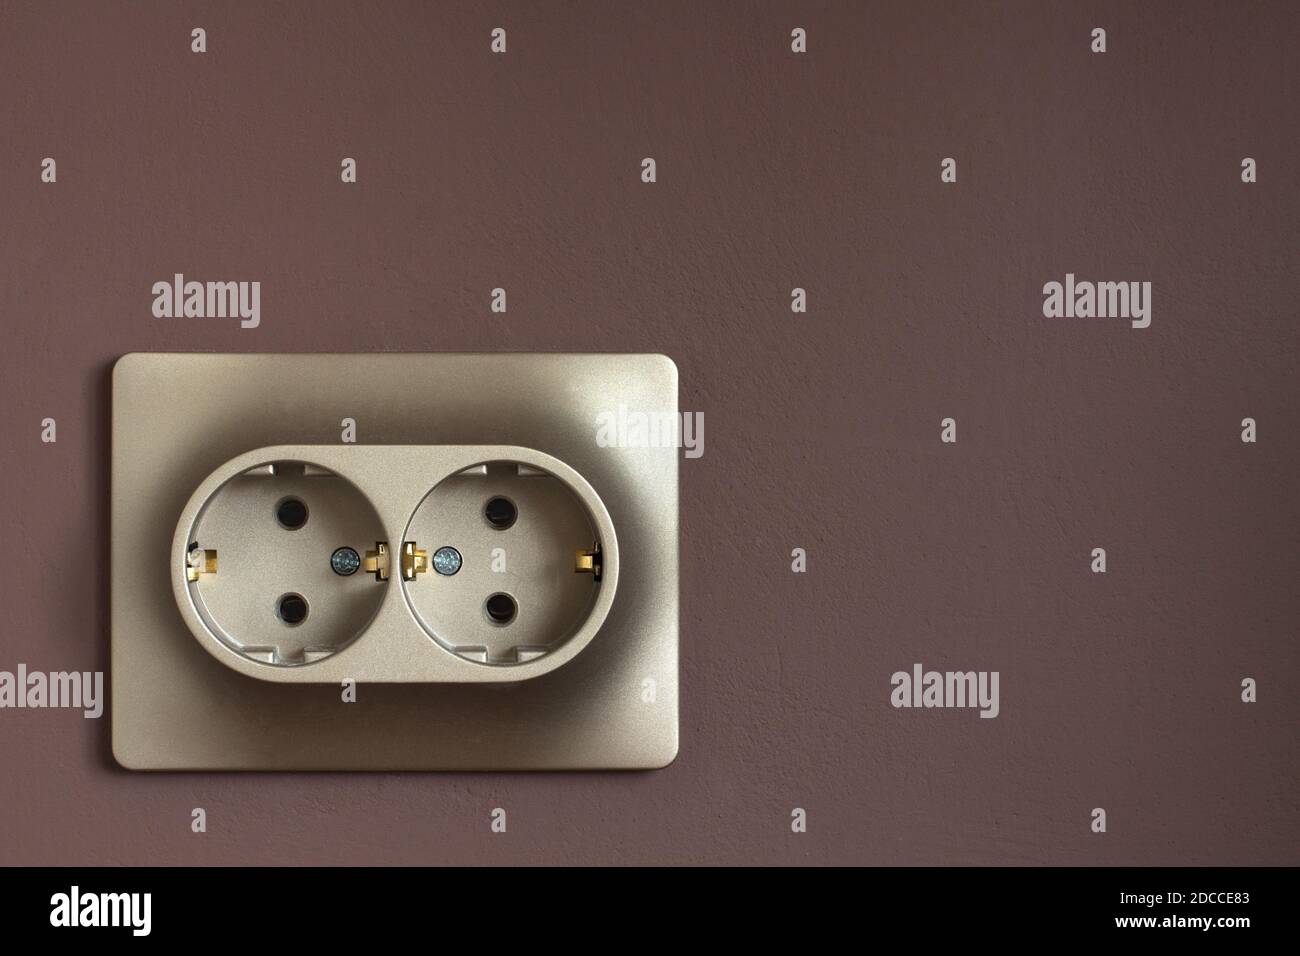 Golden double power socket on a painted brown wall. Standard european electrical connector close-up Stock Photo